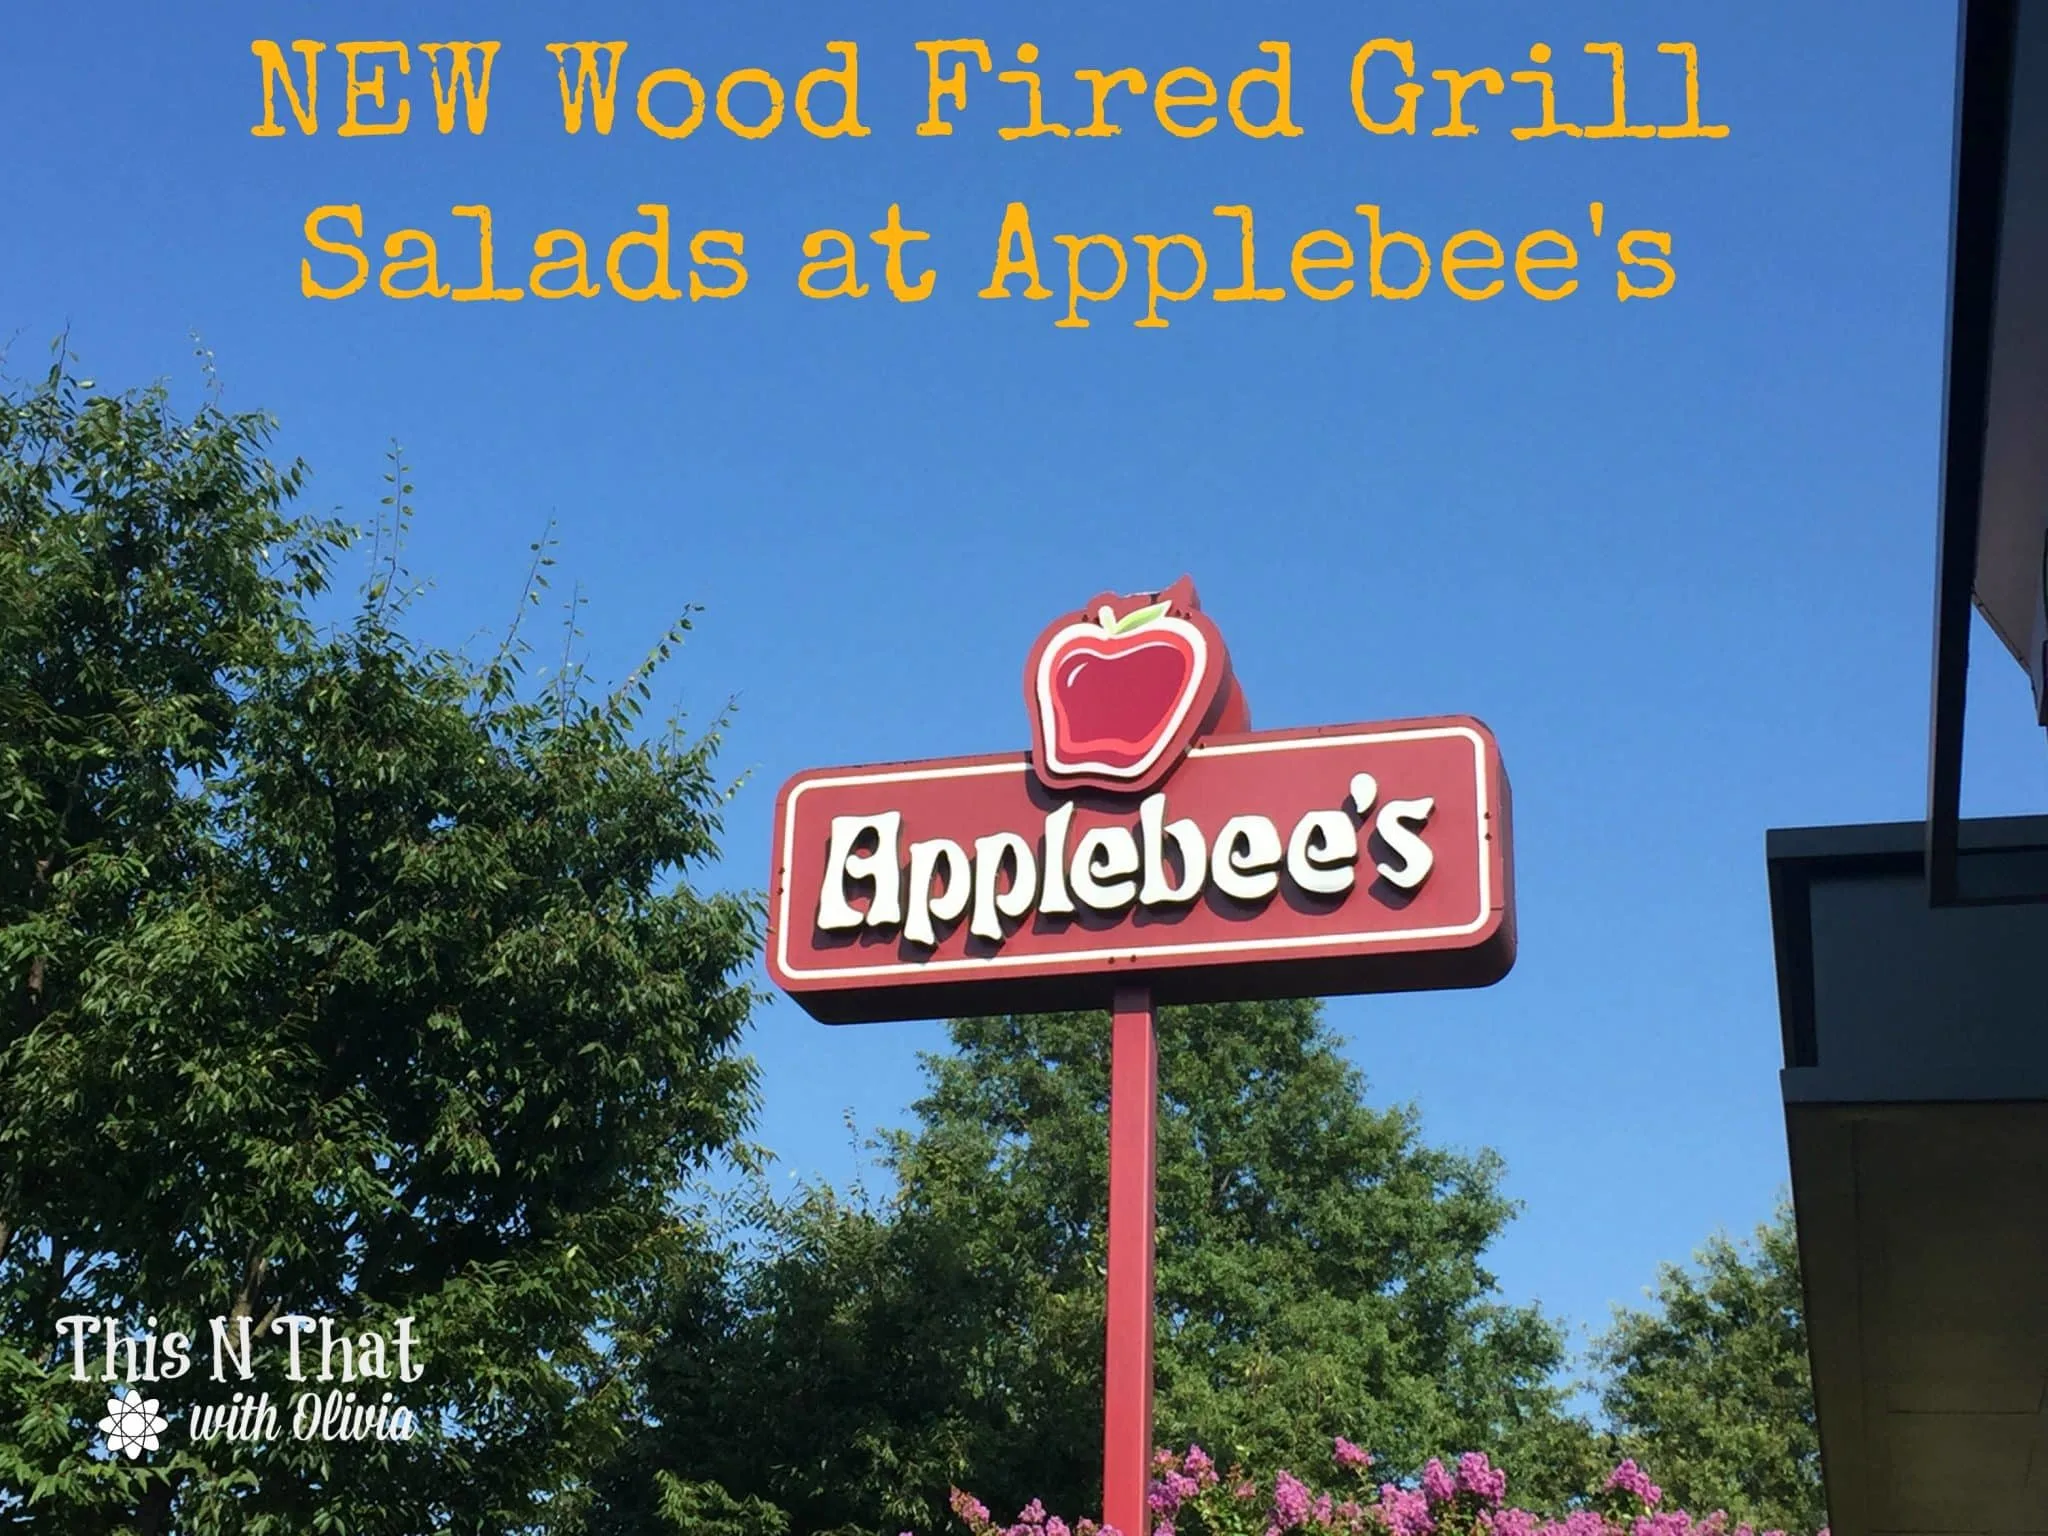 NEW Wood Fired Grill Salads at Applebee's @Applebees | ThisNThatwithOlivia.com